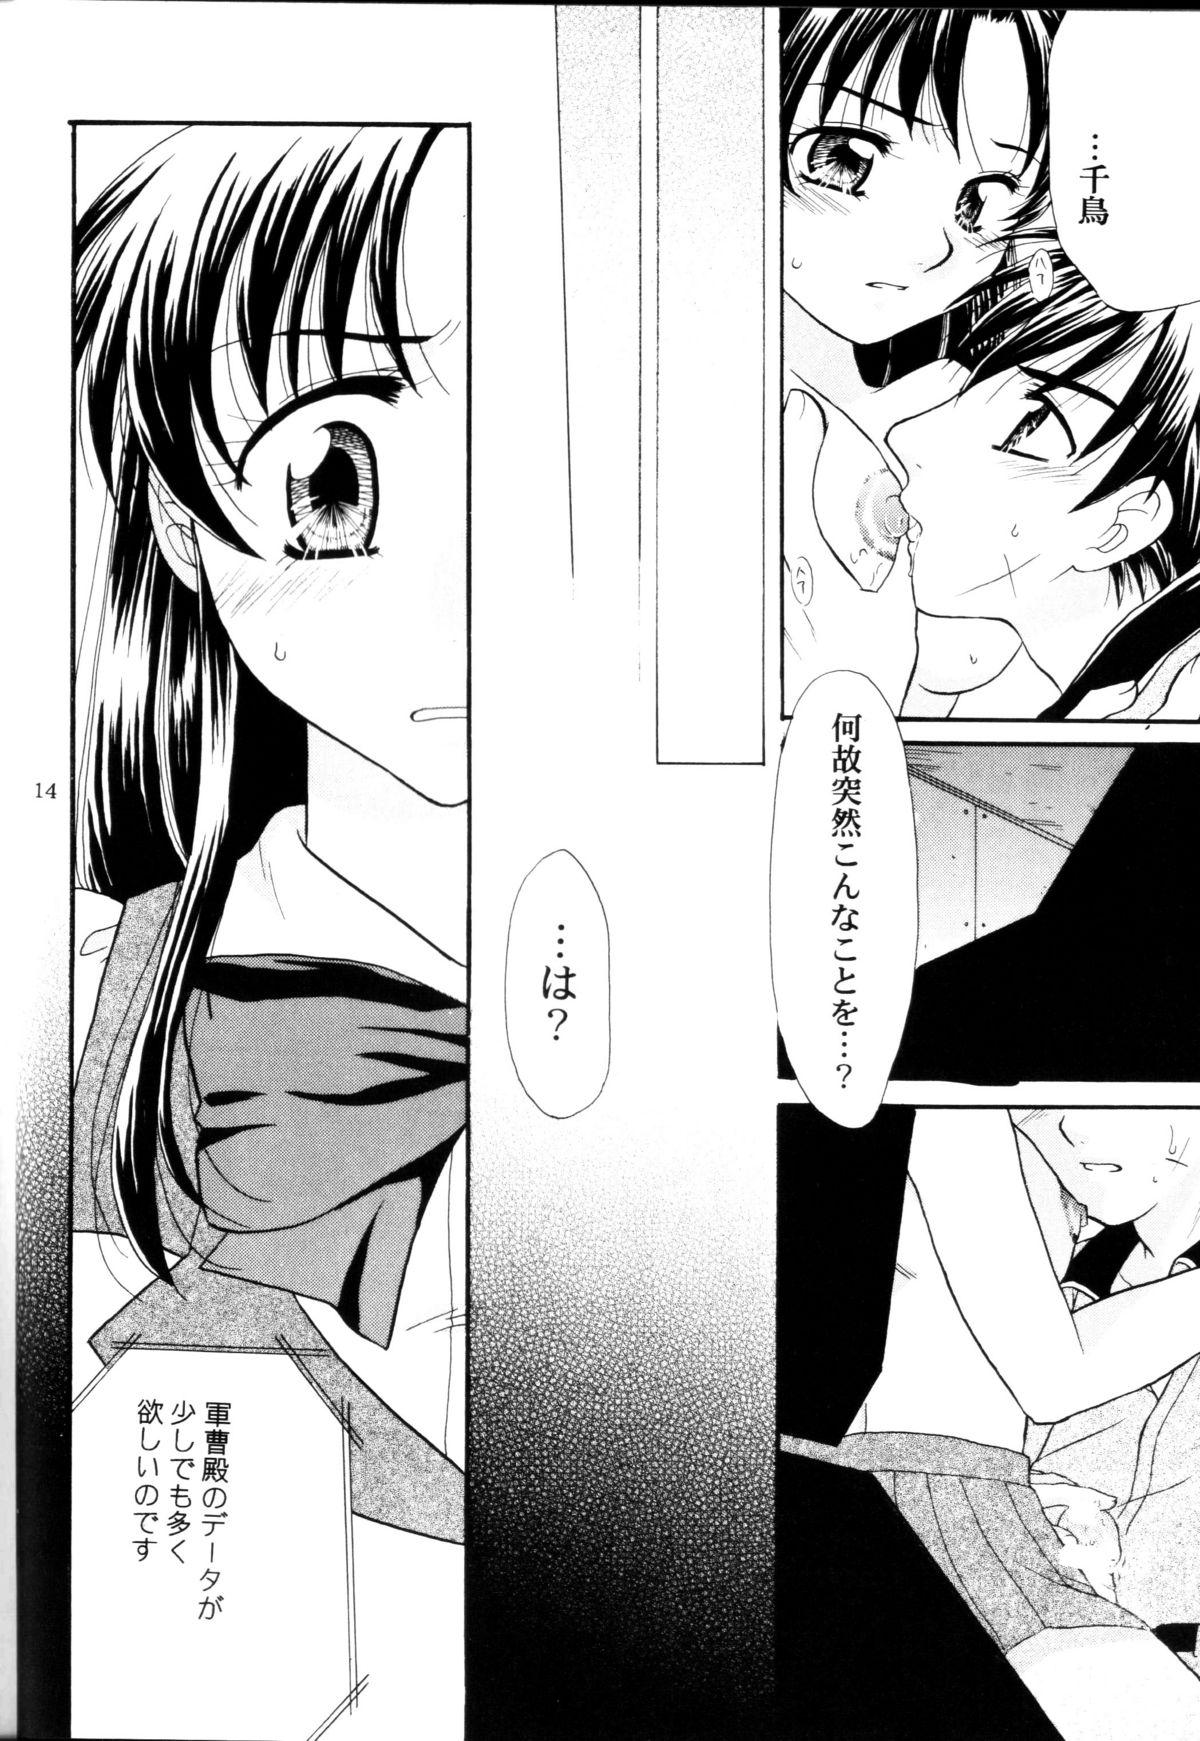 Clit A.I. - Full metal panic Bitch - Page 13